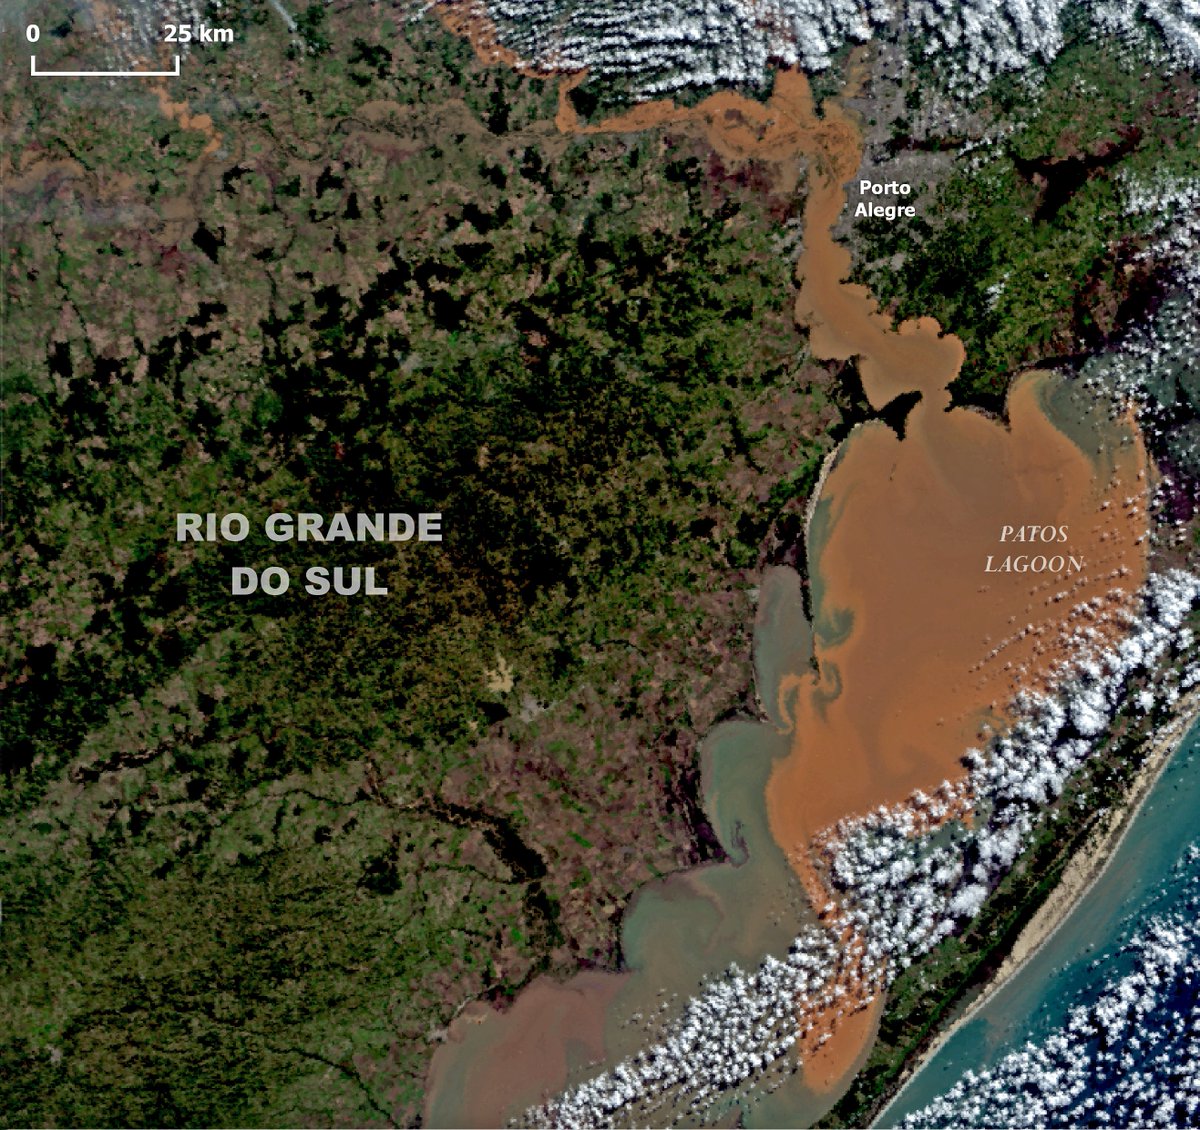 🔴⚠️⛈️🇧🇷After increasing again for more rains today #Guaiba seems to be stable over 5m in #PortoAlegre.The #Sentinel3📸of May 14 shows a catastrophic large view of the #floods in #RioGrandedoSul.And the sediments cover LagoaDosPatos for 4000km2 #Brazil #ClimateEmergency